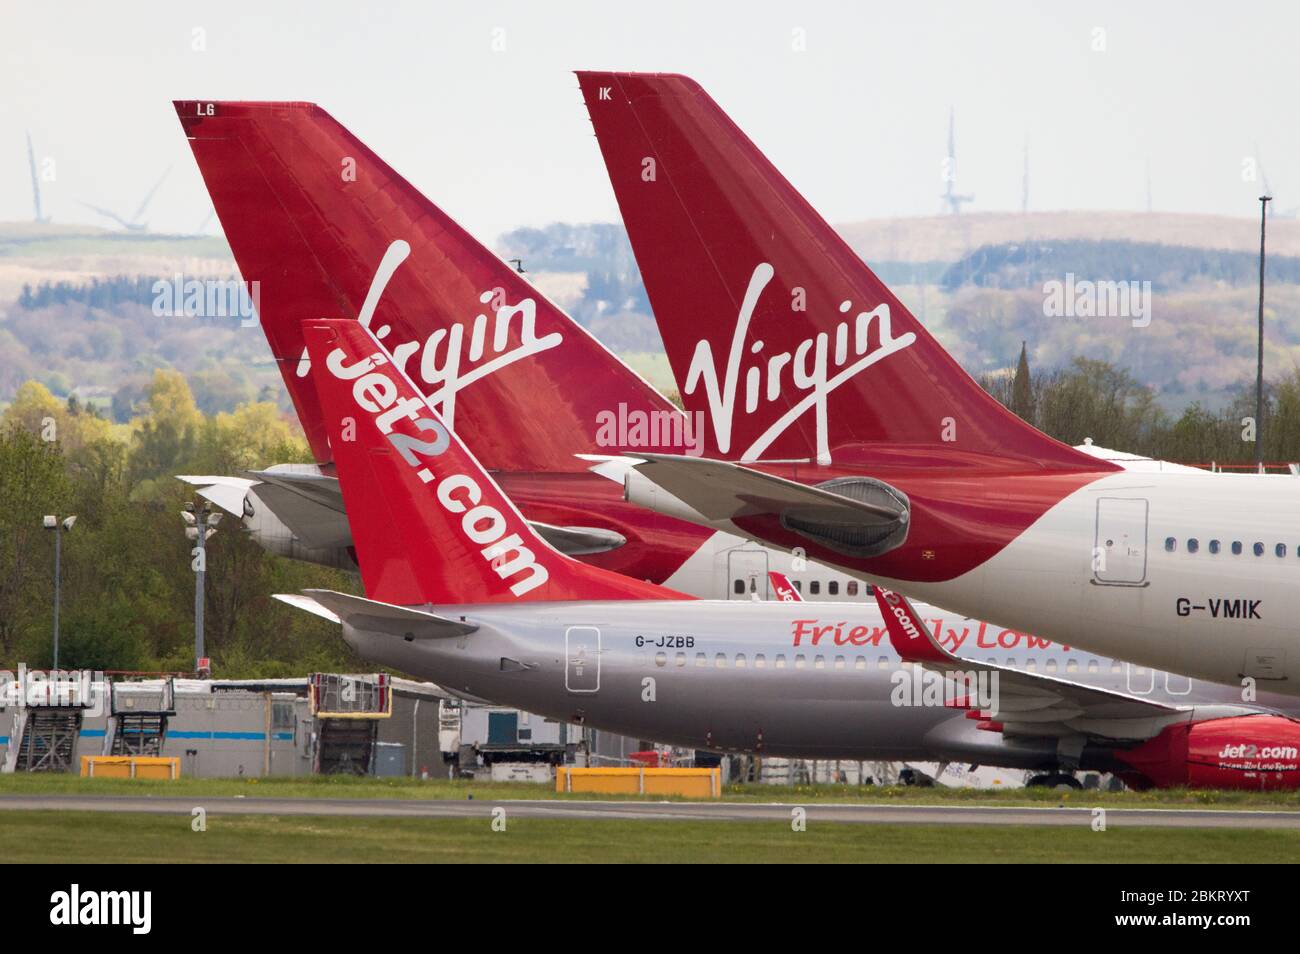 Glasgow, UK. 27th Apr, 2020. Pictured: Grounded Virgin Atlantic wide body jets at Glasgow Airport during the Coronavirus (COVID19) extended lockdown. Foreground is an Airbus A330-300 with the one behind a Boeing 747-400. Virgin Atlantic will also keep their operations closed at Gatwick which will have massive knock on effects for other airlines and the south of England. Credit: Colin Fisher/Alamy Live News. Stock Photo